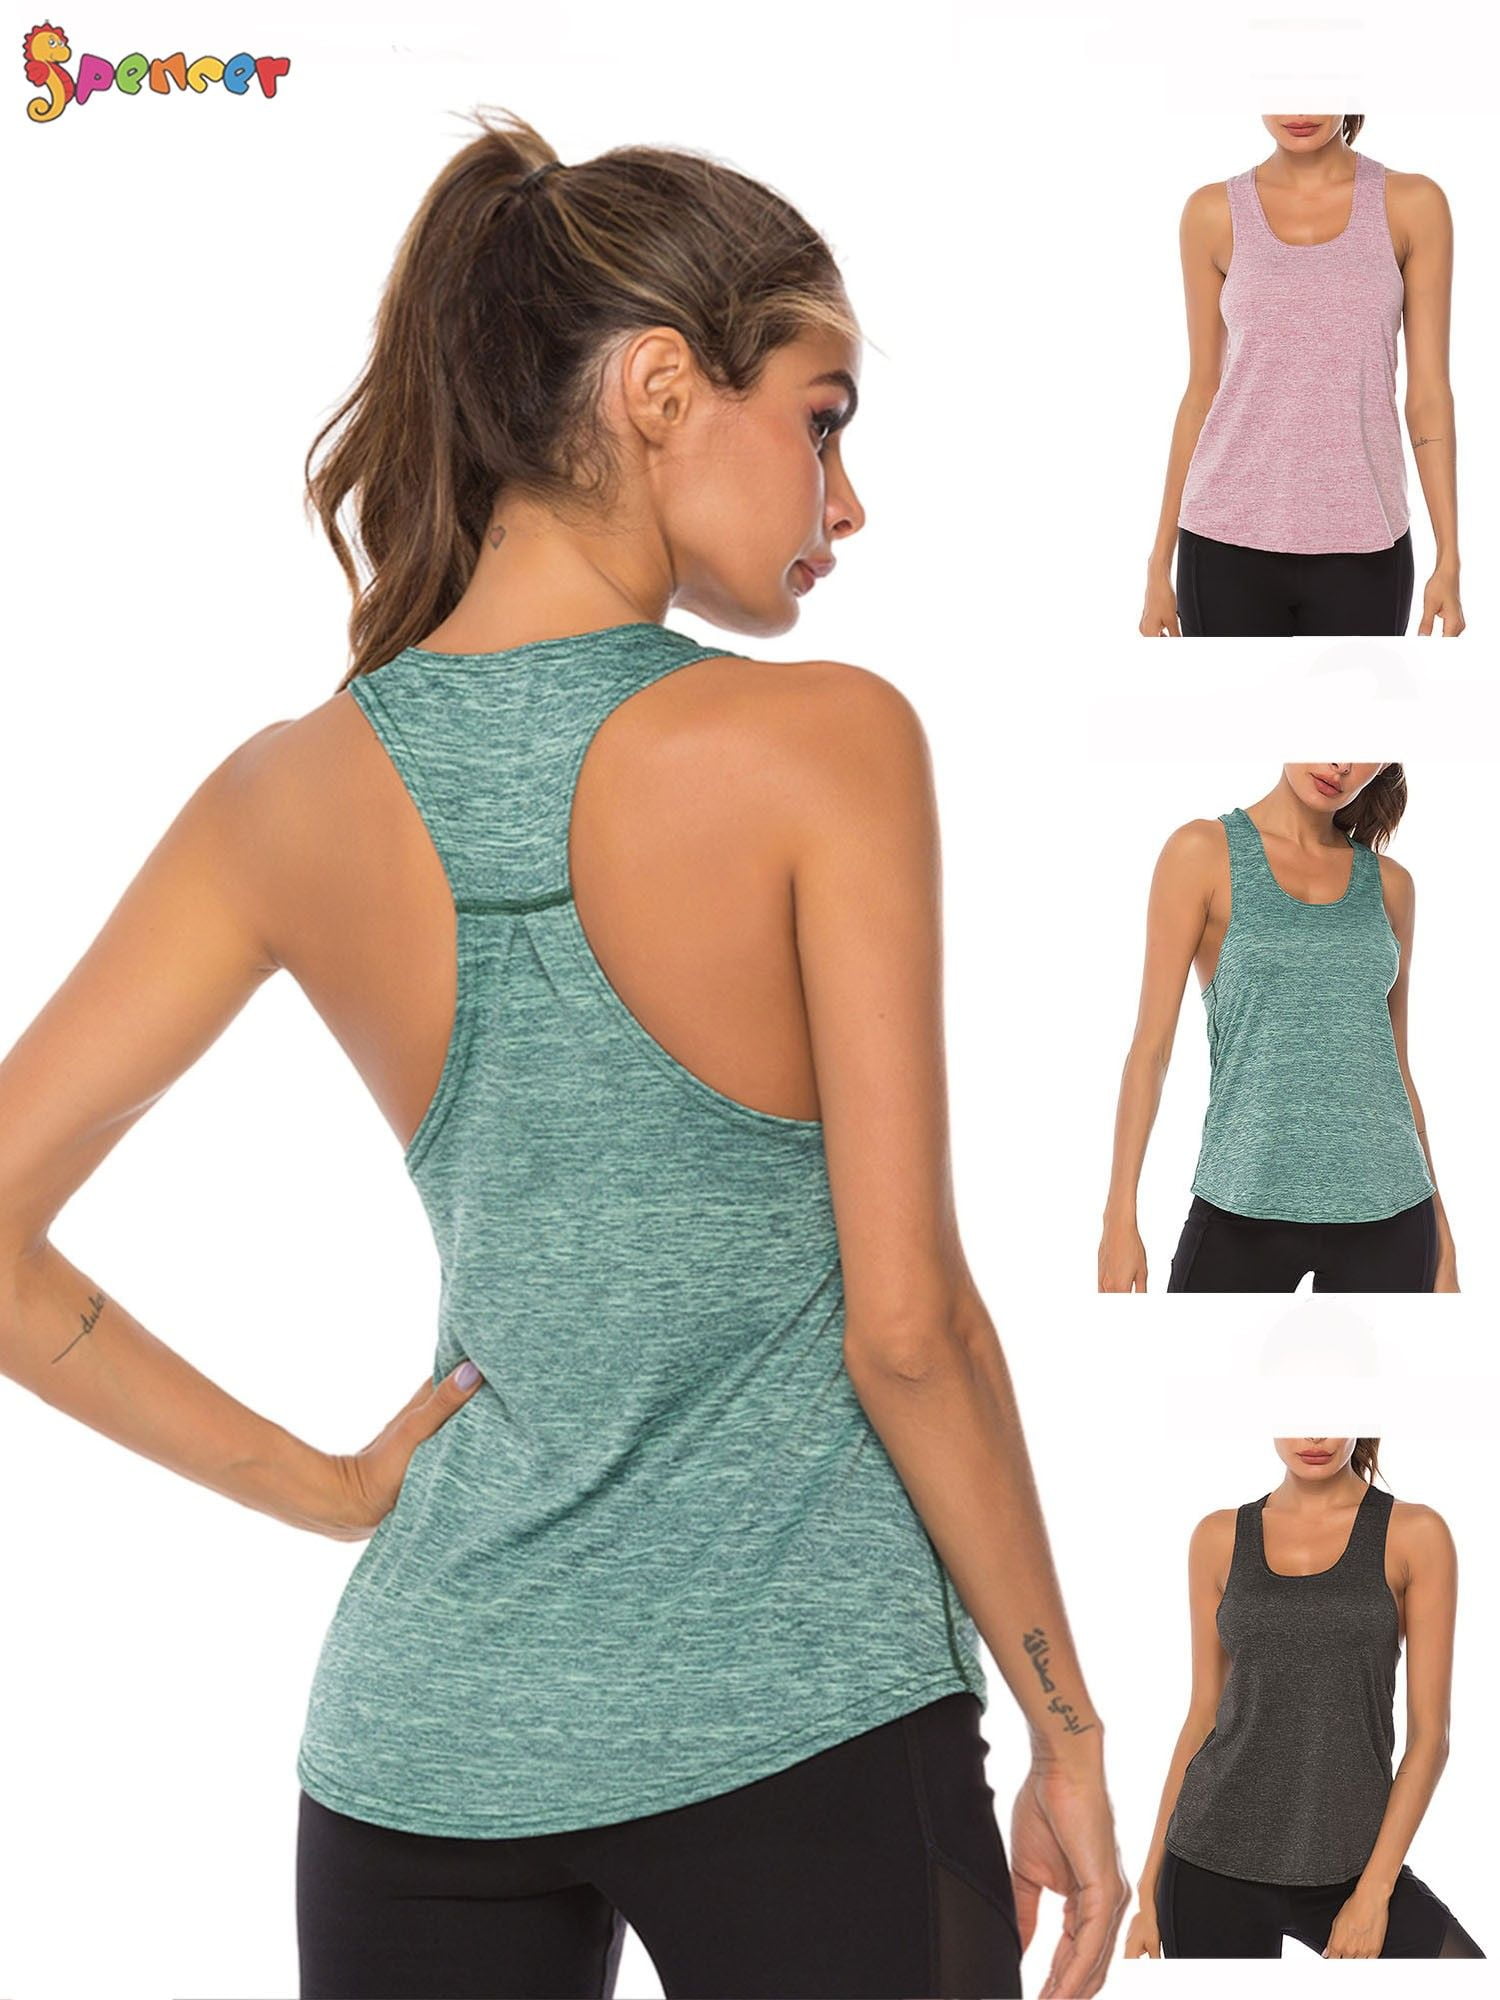 Spencer Women's Workout Tank Tops Casual Sleeveless Racerback Athletic Yoga  Tops Quick Dry Sport Shirts for Gym Exercise (XL, Green) 